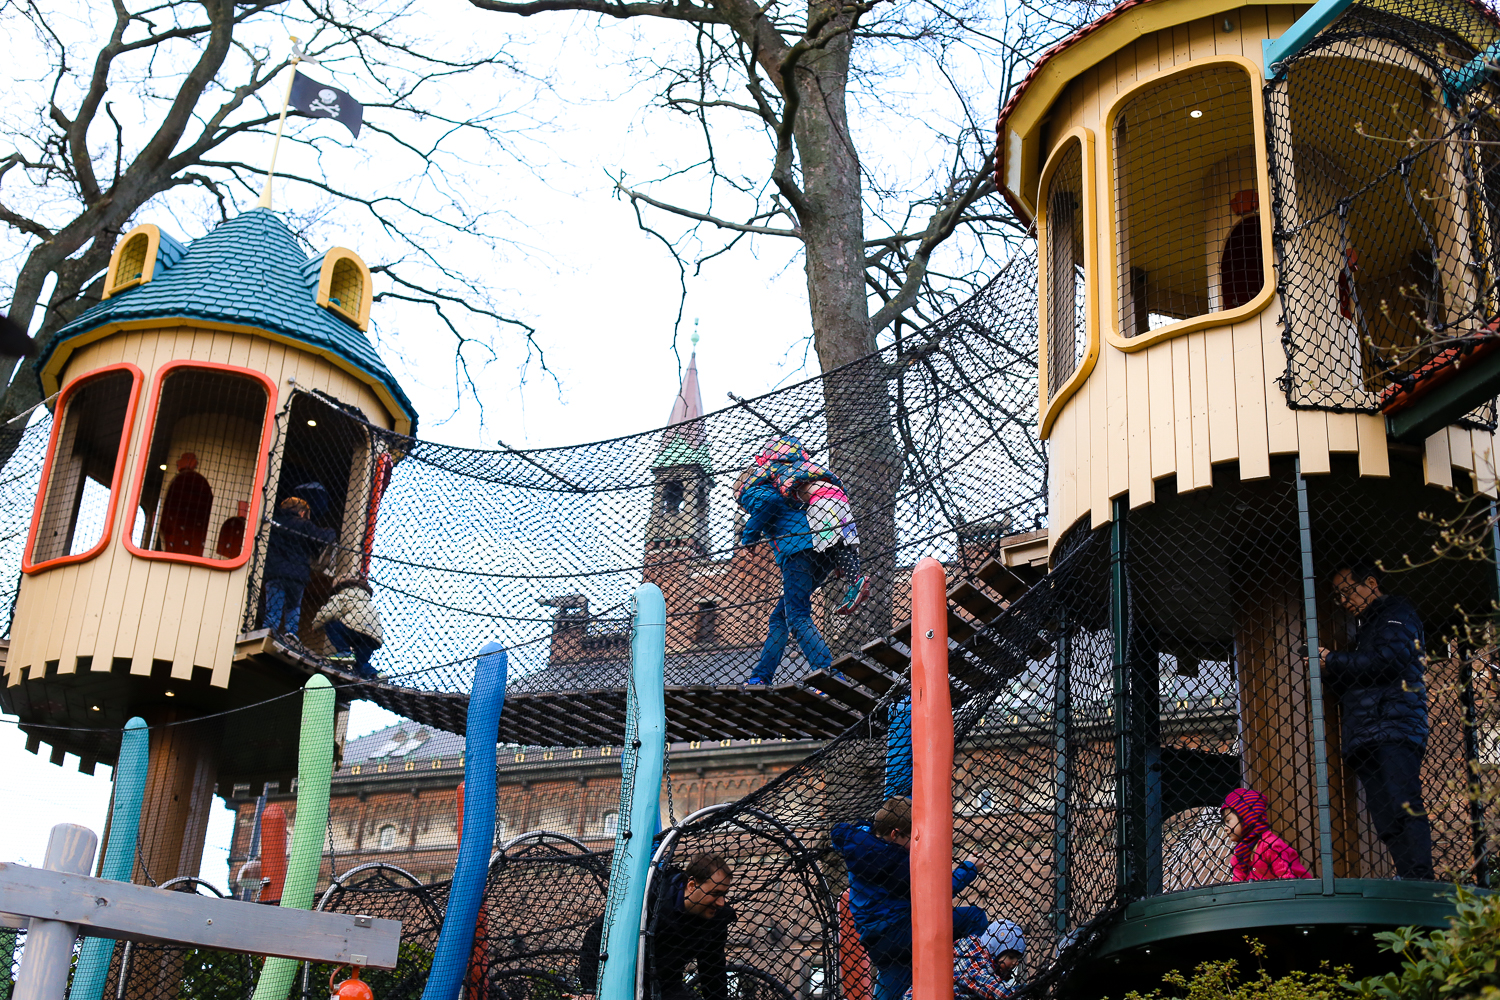 Don't miss out on taking your kids to the children's playground at Tivoli Gardens in Copenhagen, Denmark - it's full of surprises!